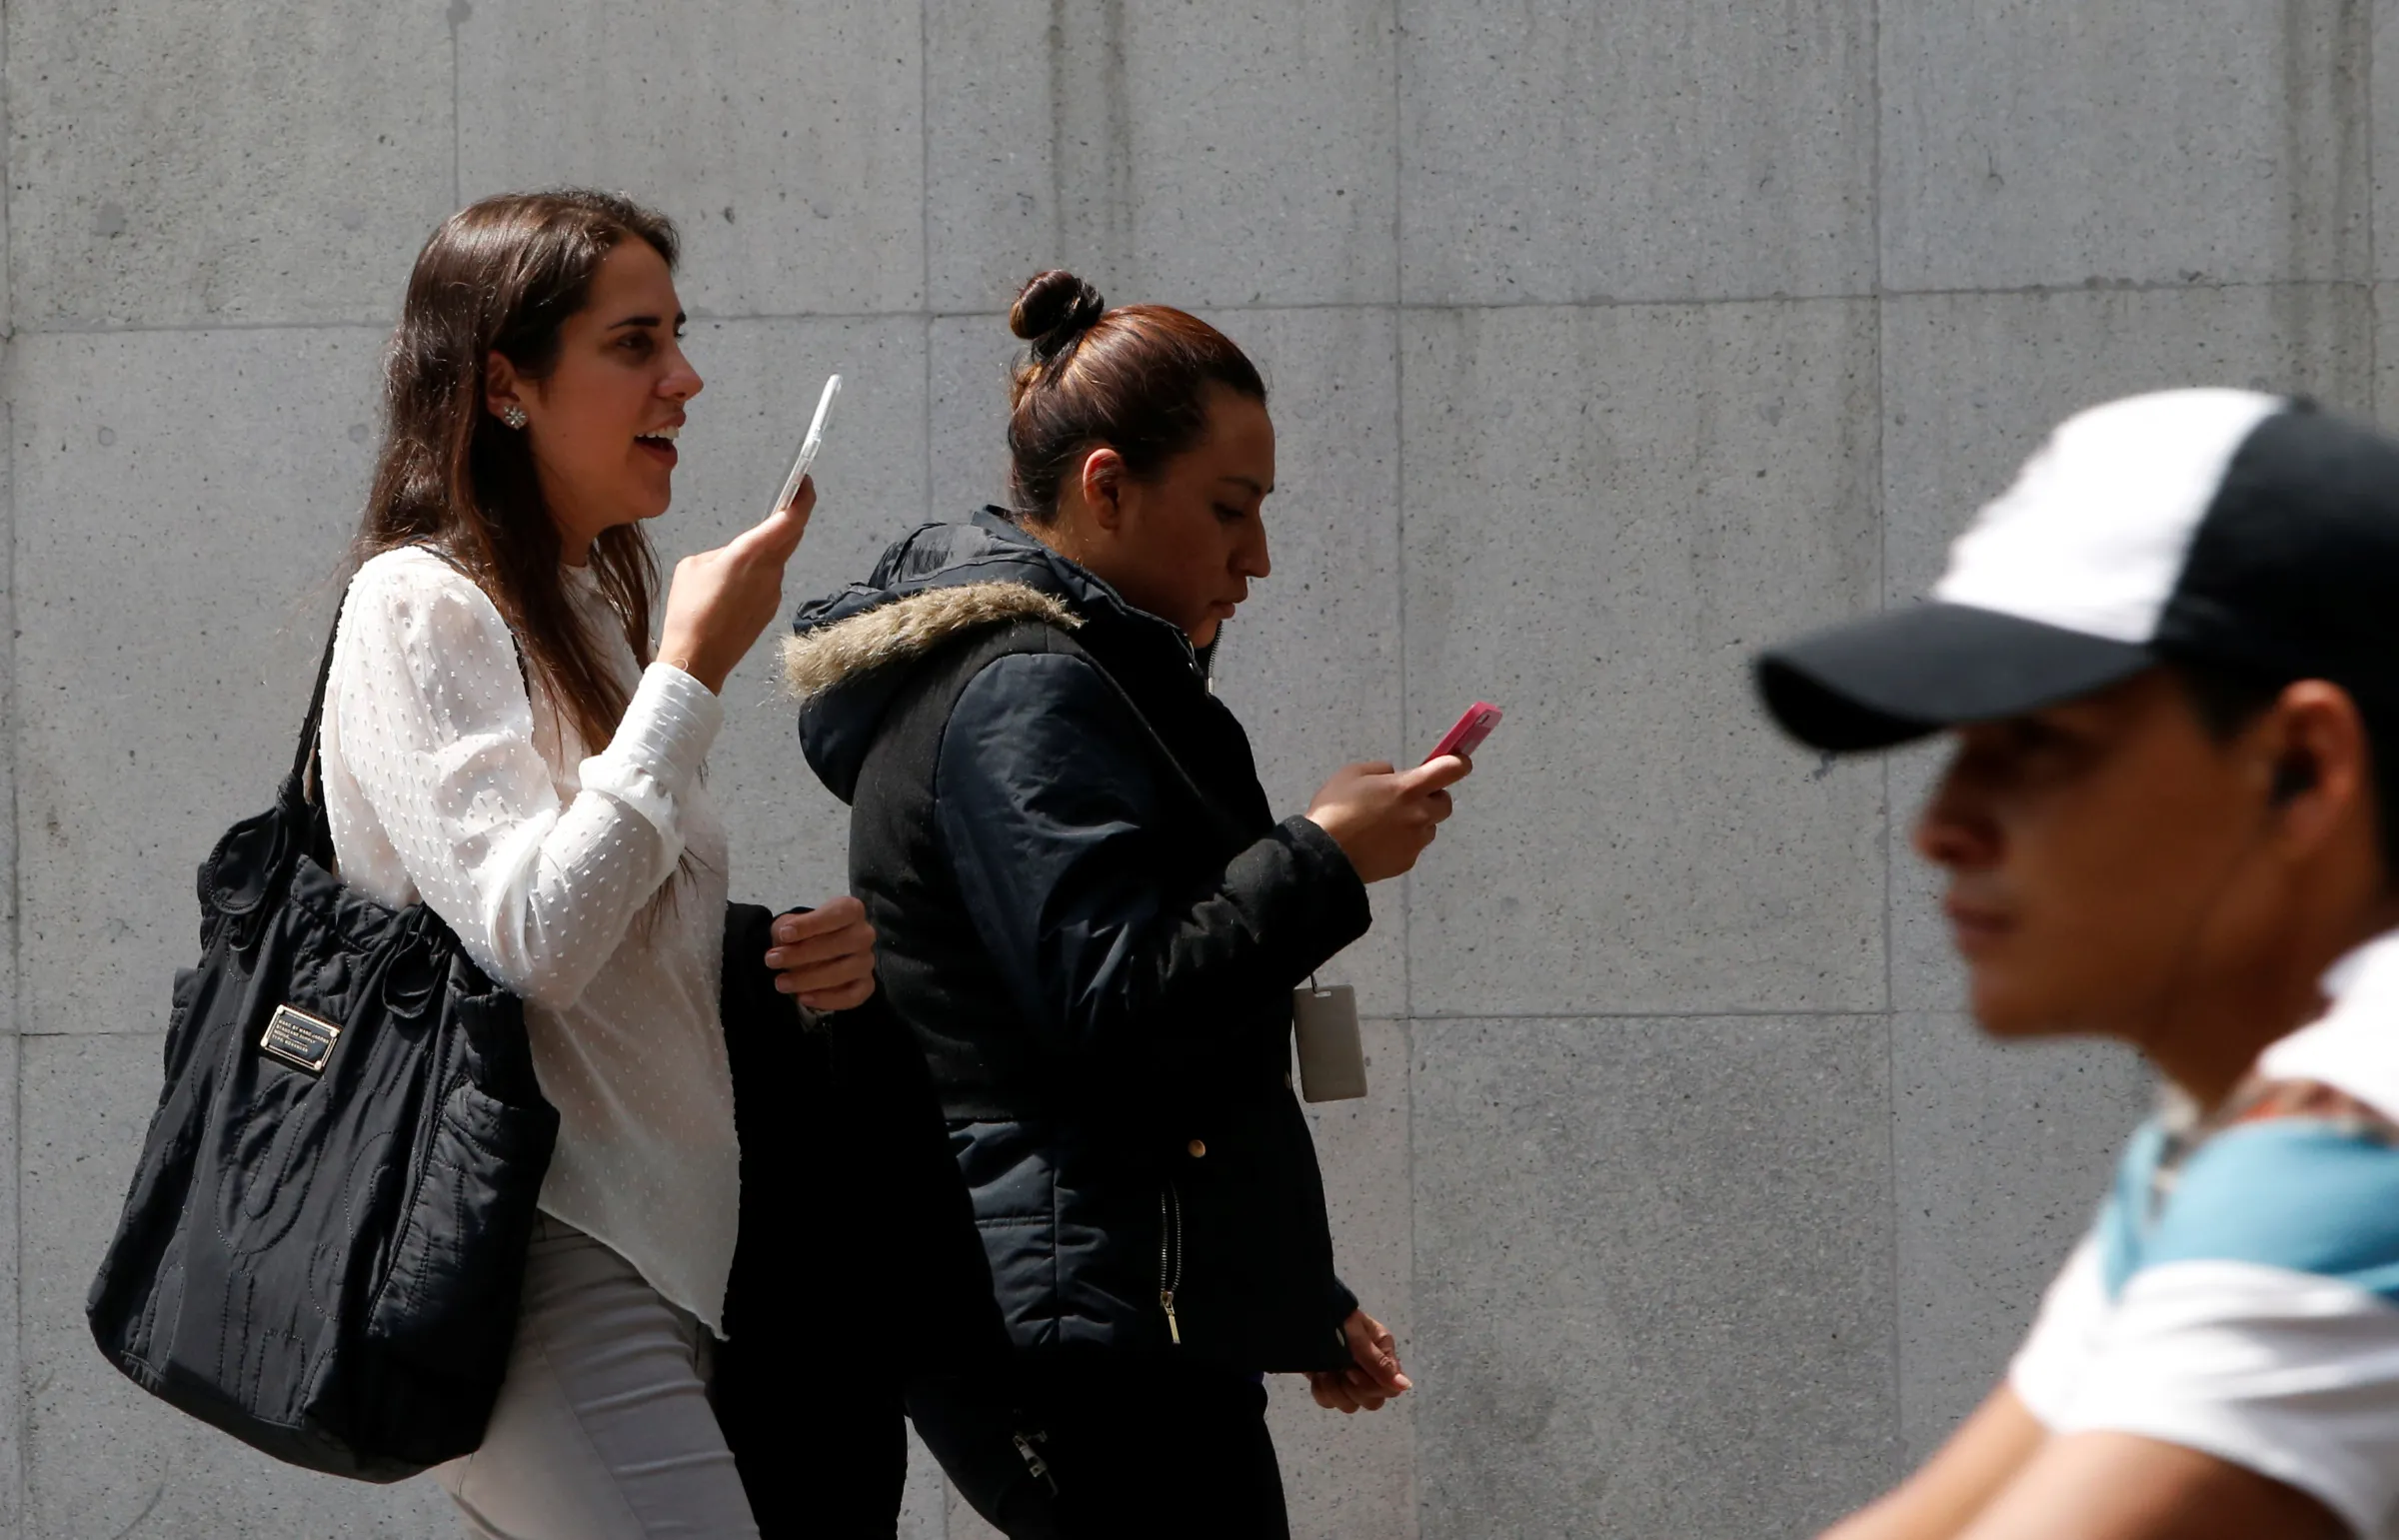 Women use their mobile phones while walking in Mexico City, Mexico July 5, 2017. REUTERS/Carlos Jasso